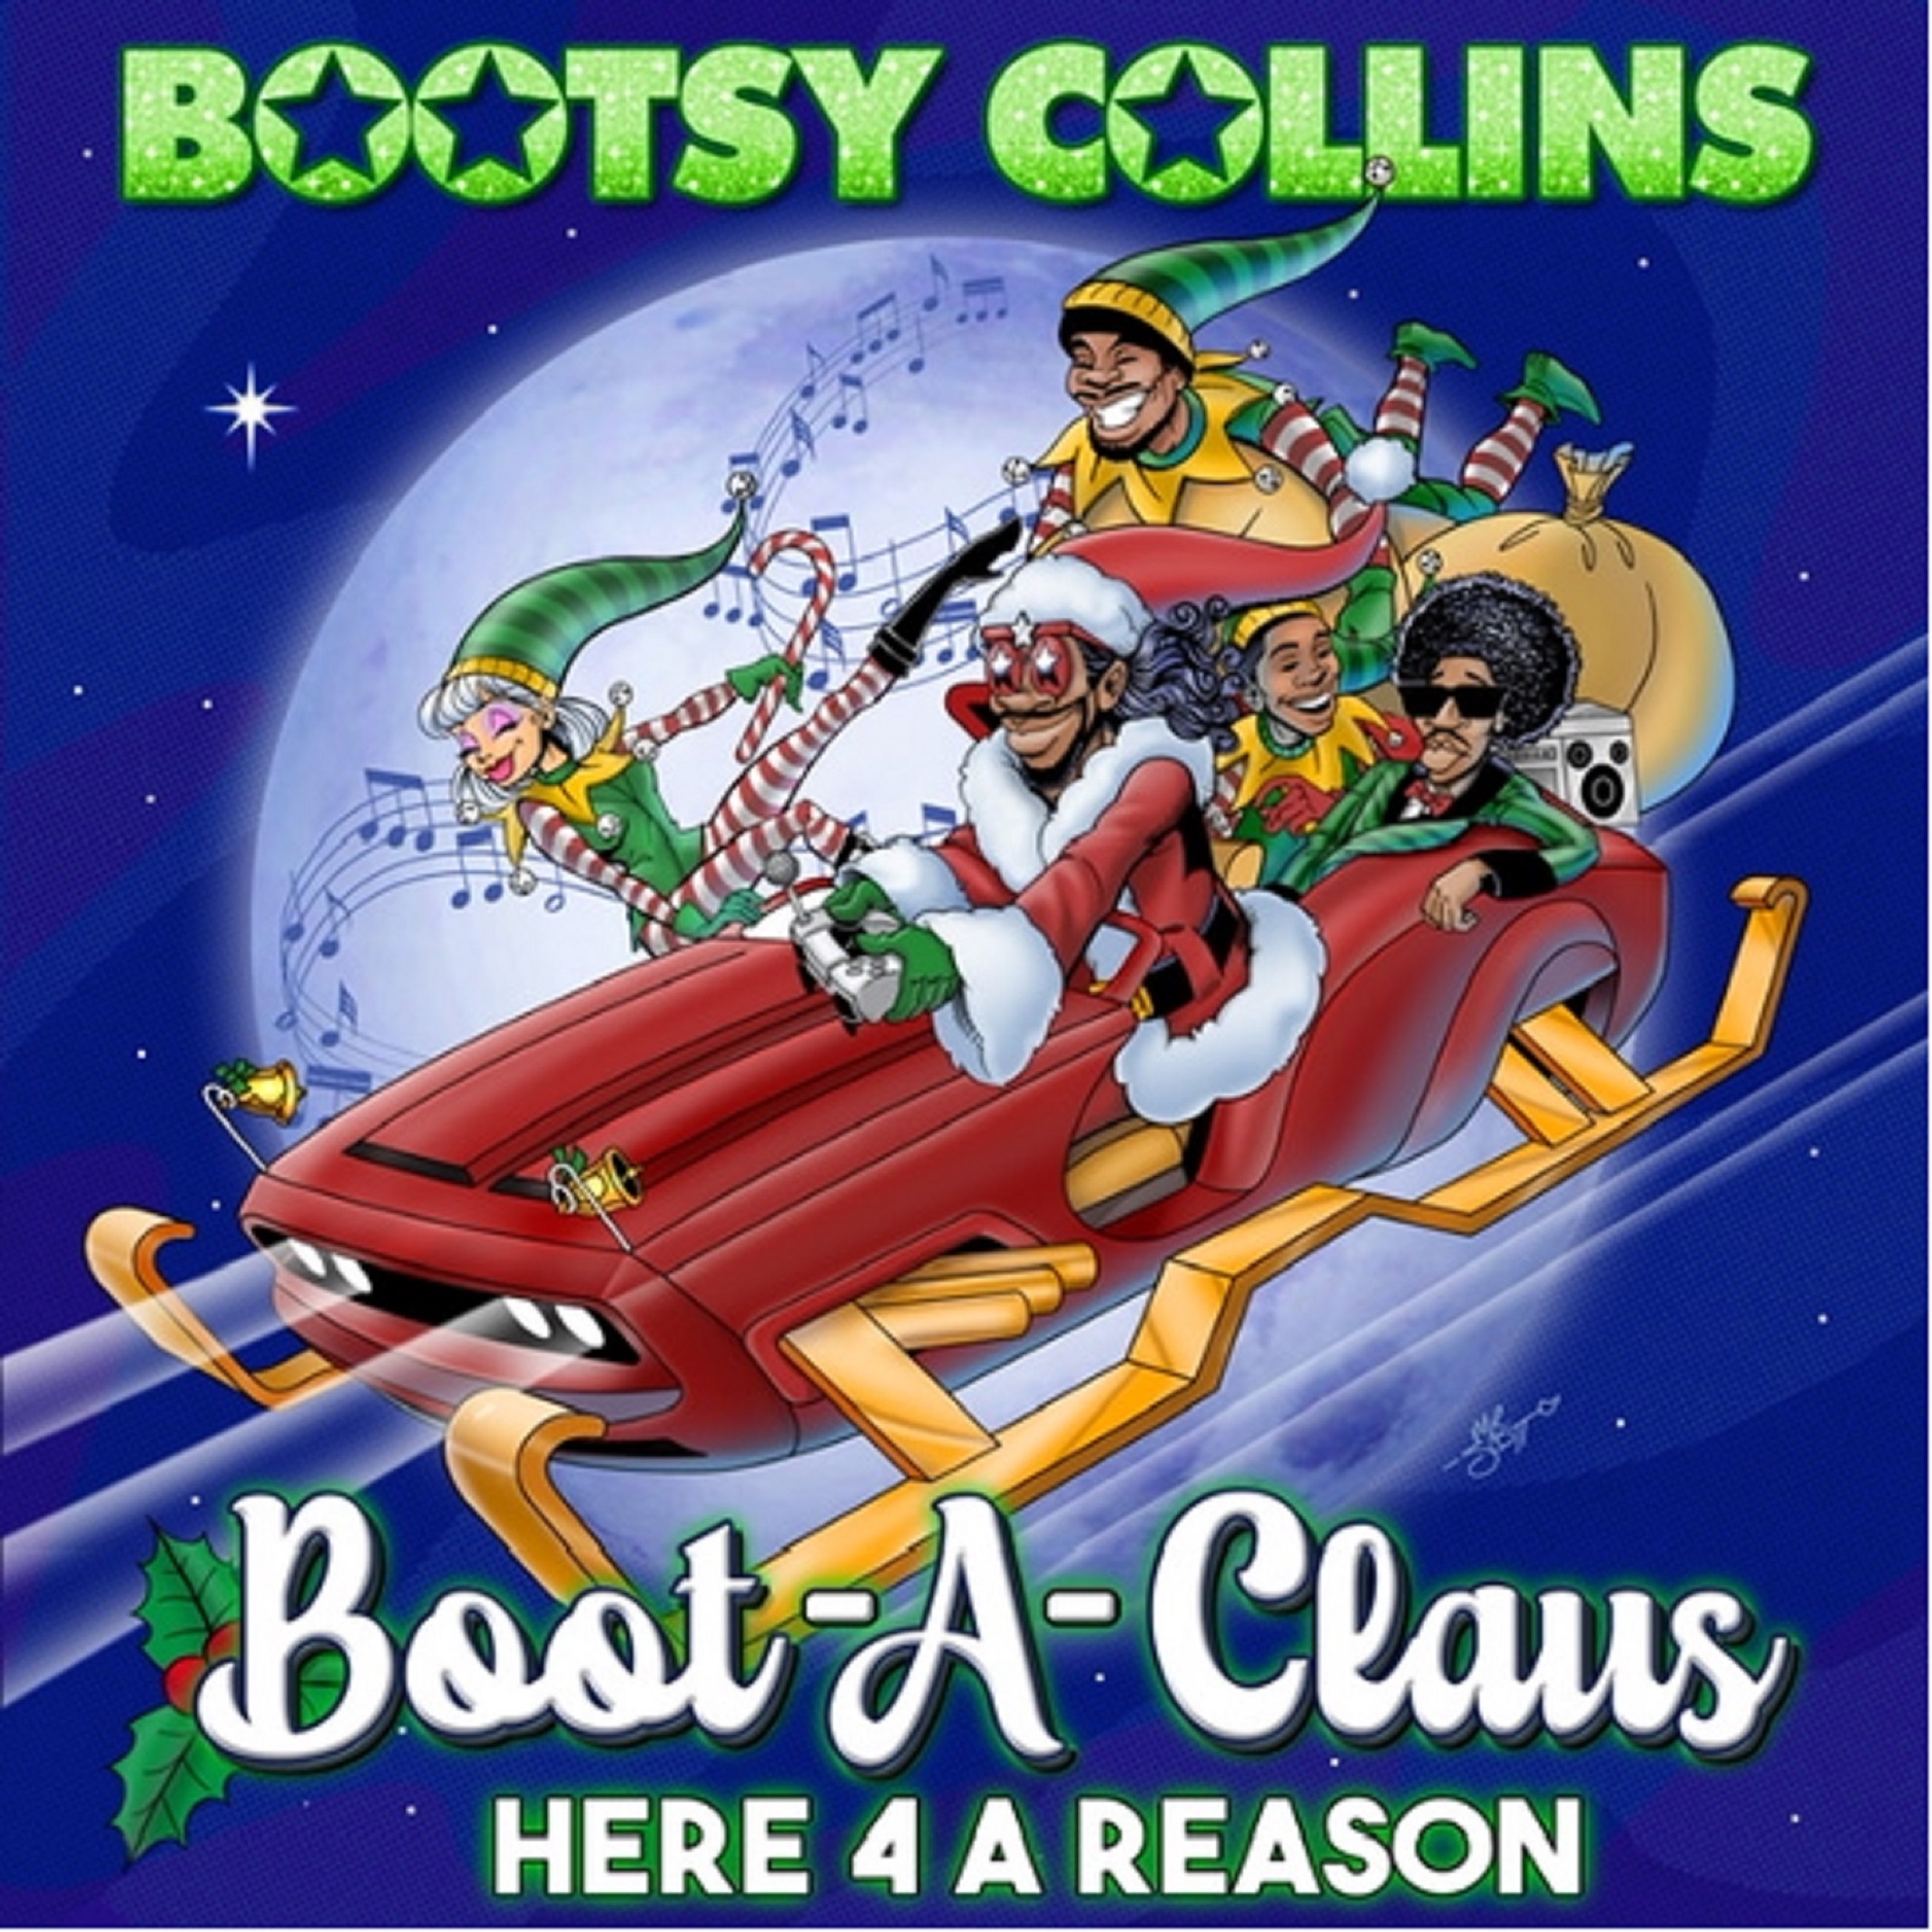 Bootsy Collins releases funky holiday single "Boot-A-Claus/Here 4-A-Reason"